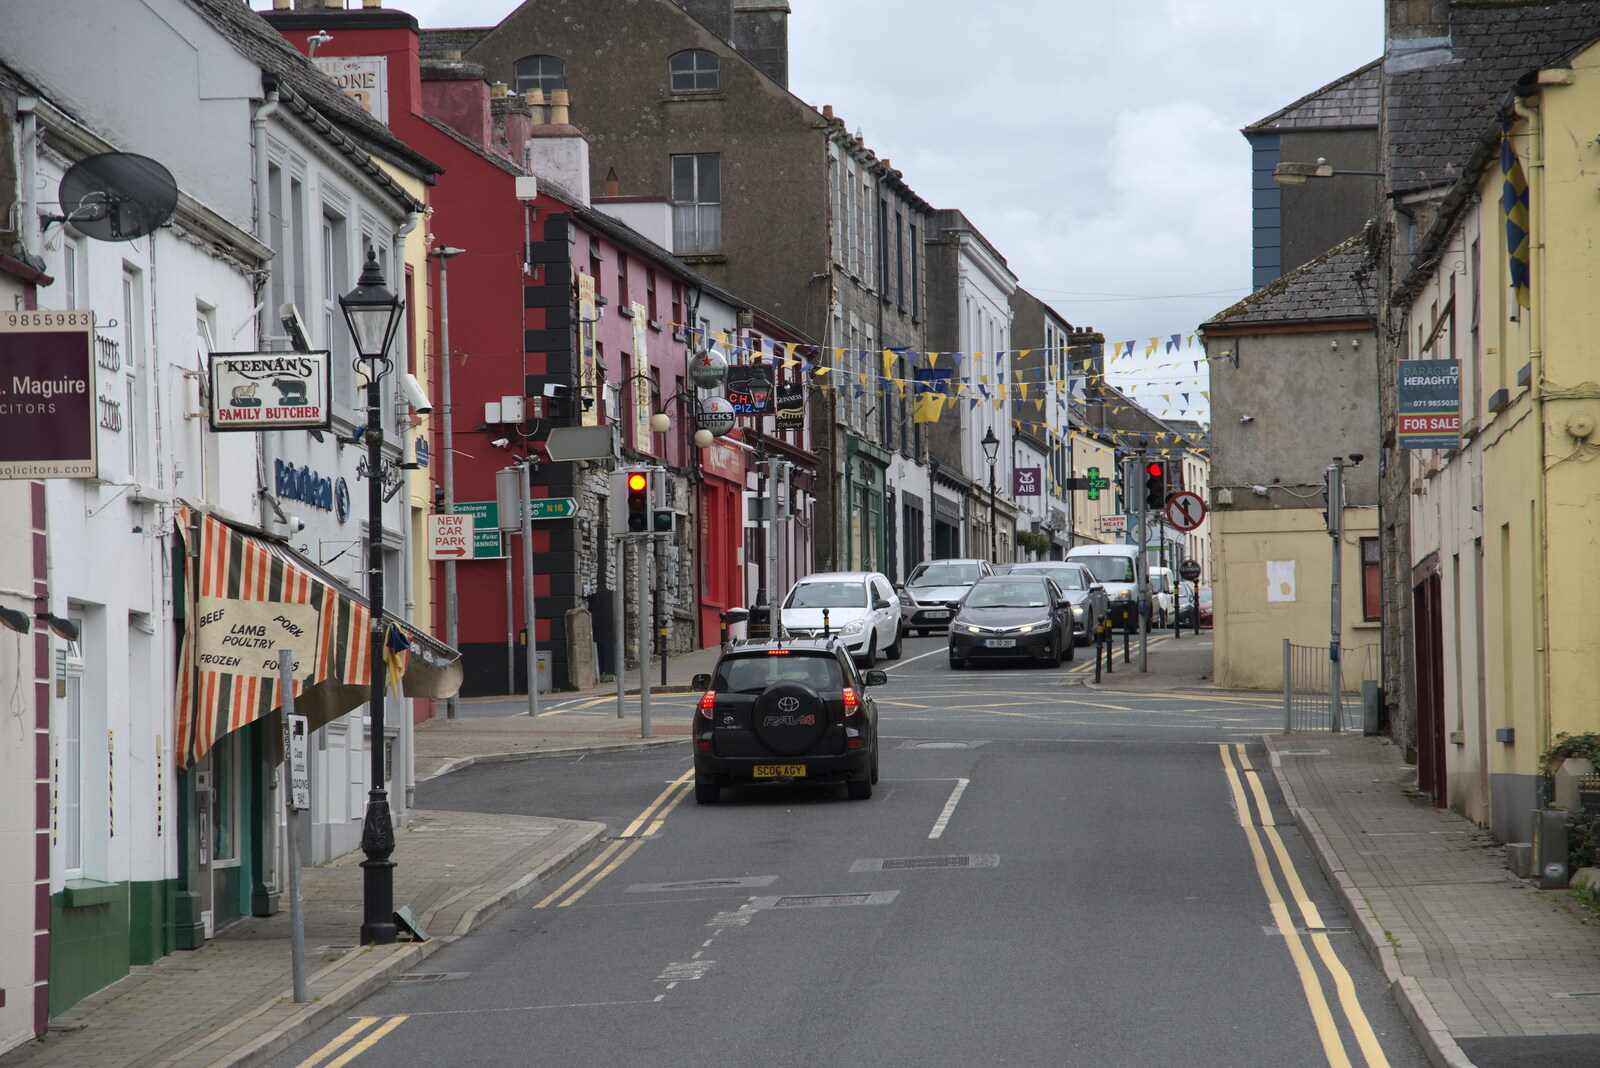 A Trip to Manorhamilton, County Leitrim, Ireland - 11th August 2021: Looking up to Main Street